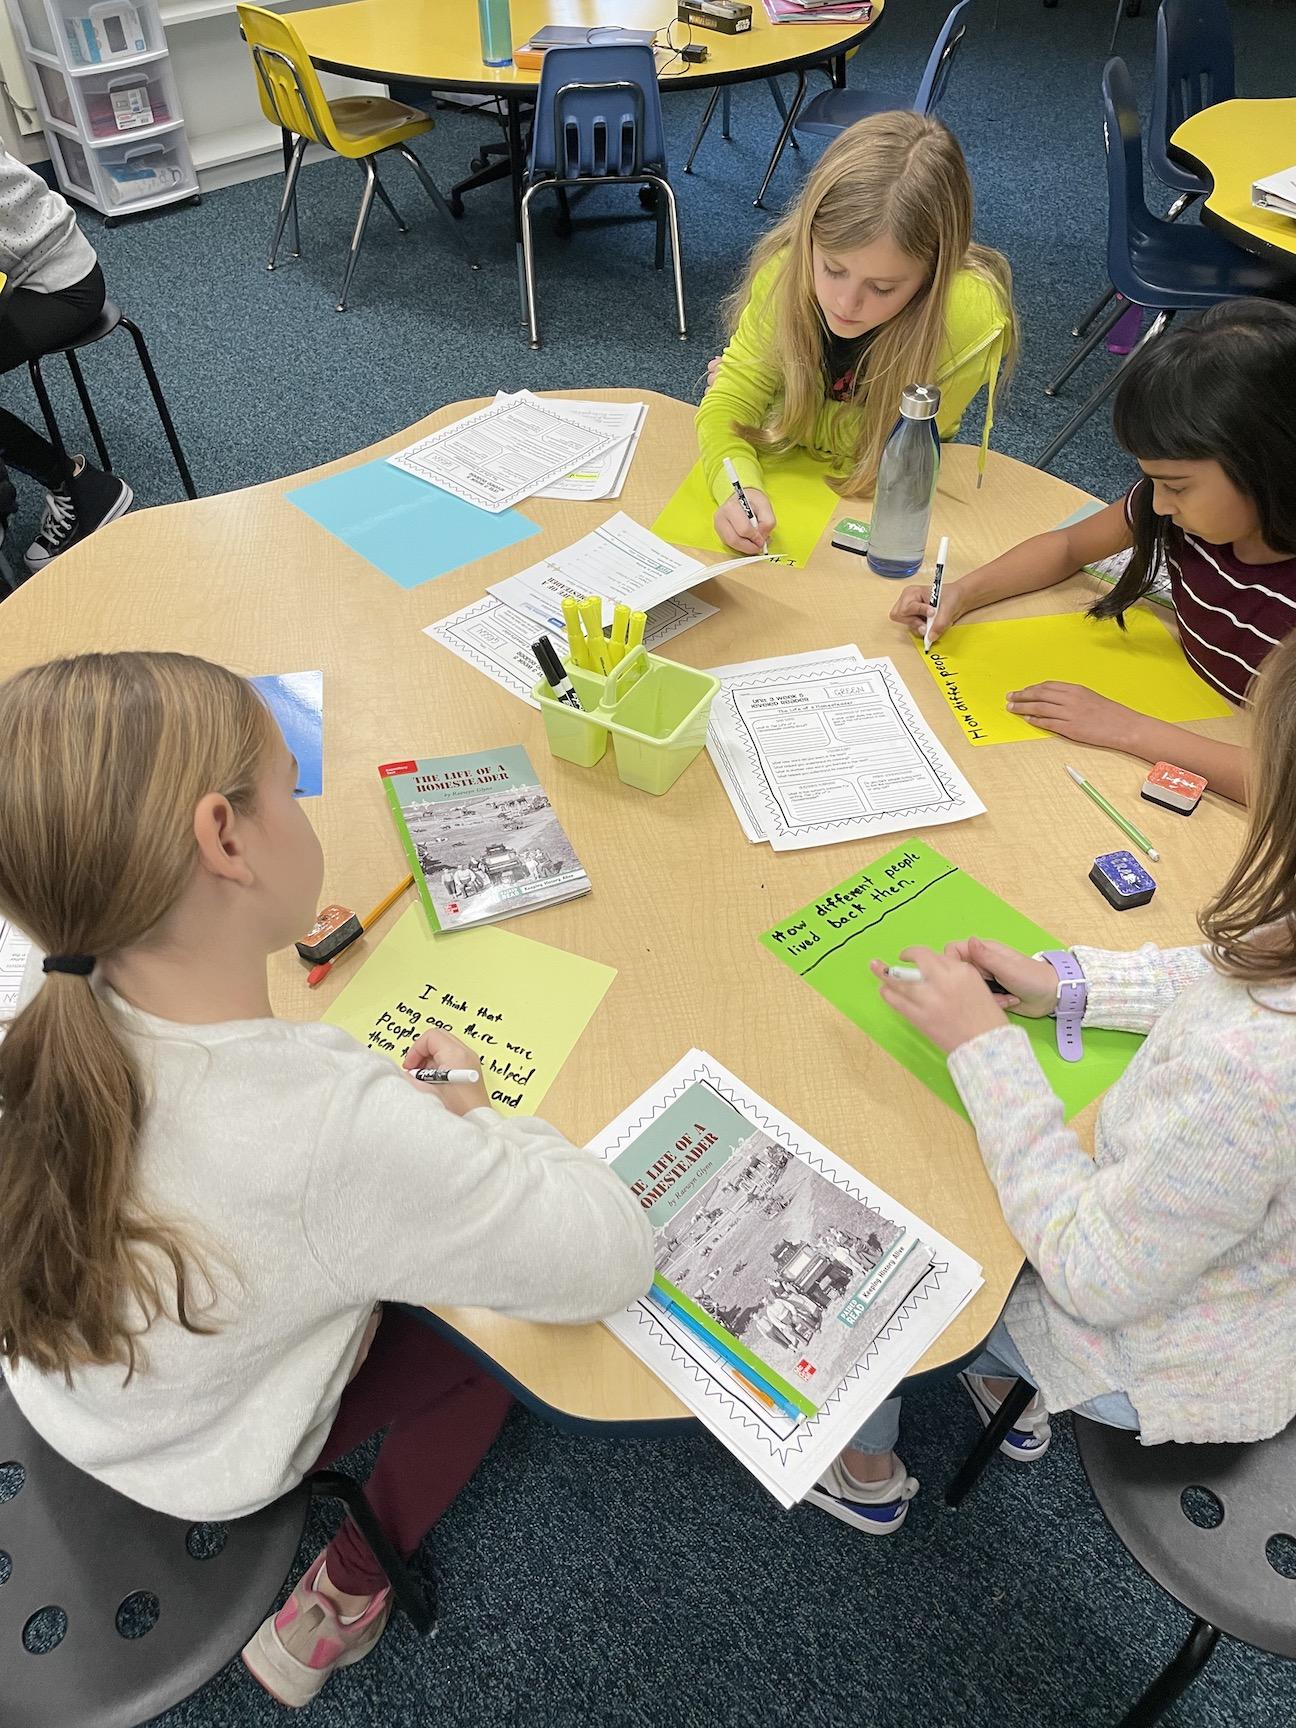 Third-graders Rylee Watson,Tenley Dubyak, Rasali Nandasiri, and Zeplynn Wade are perched upon the new stools during a collaborative guided reading lesson